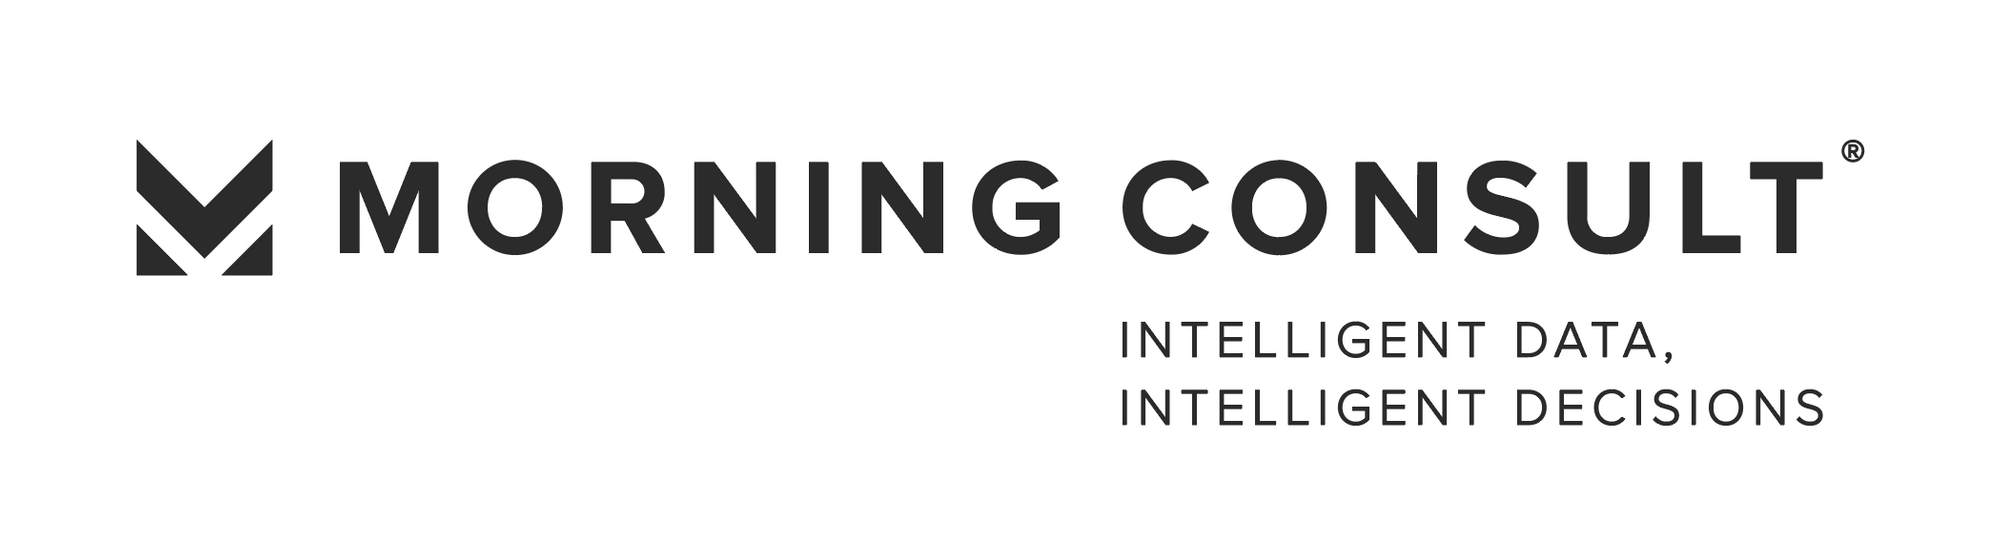 Morning Consult Logo with Tagline